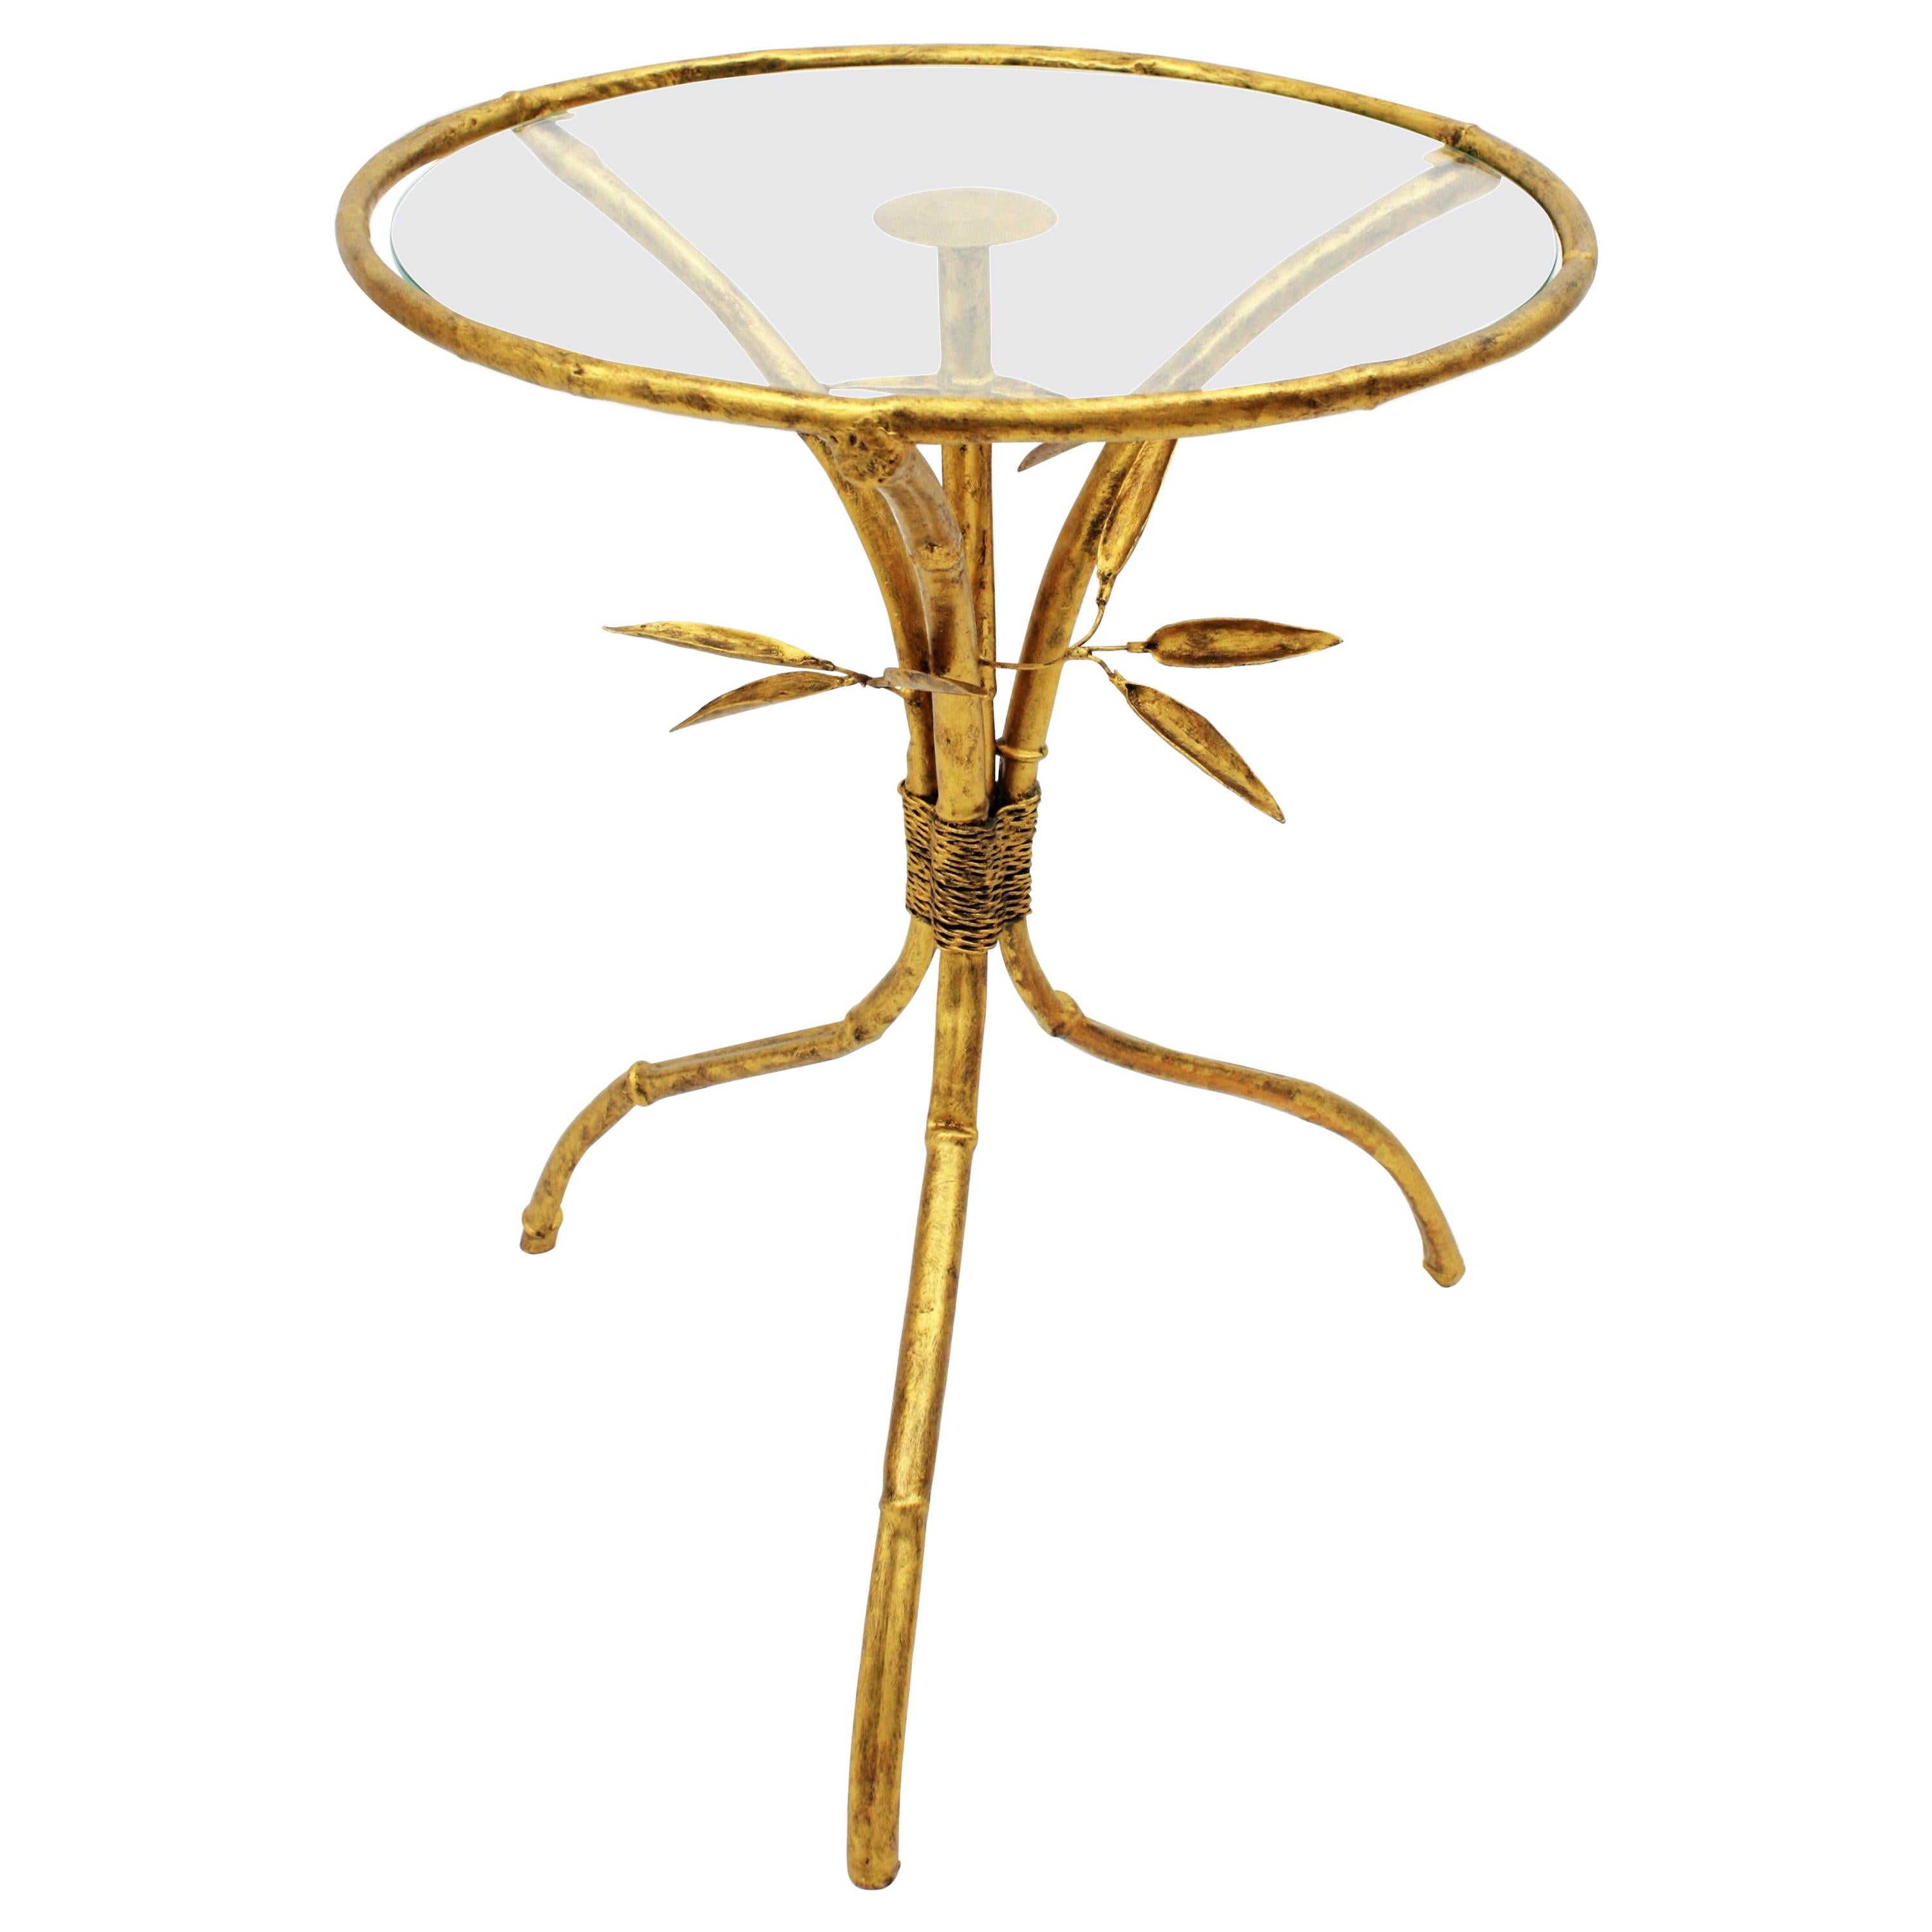 Gilt Wrought Iron Gueridon End Drinks Table / Side Table, Faux Bamboo Design